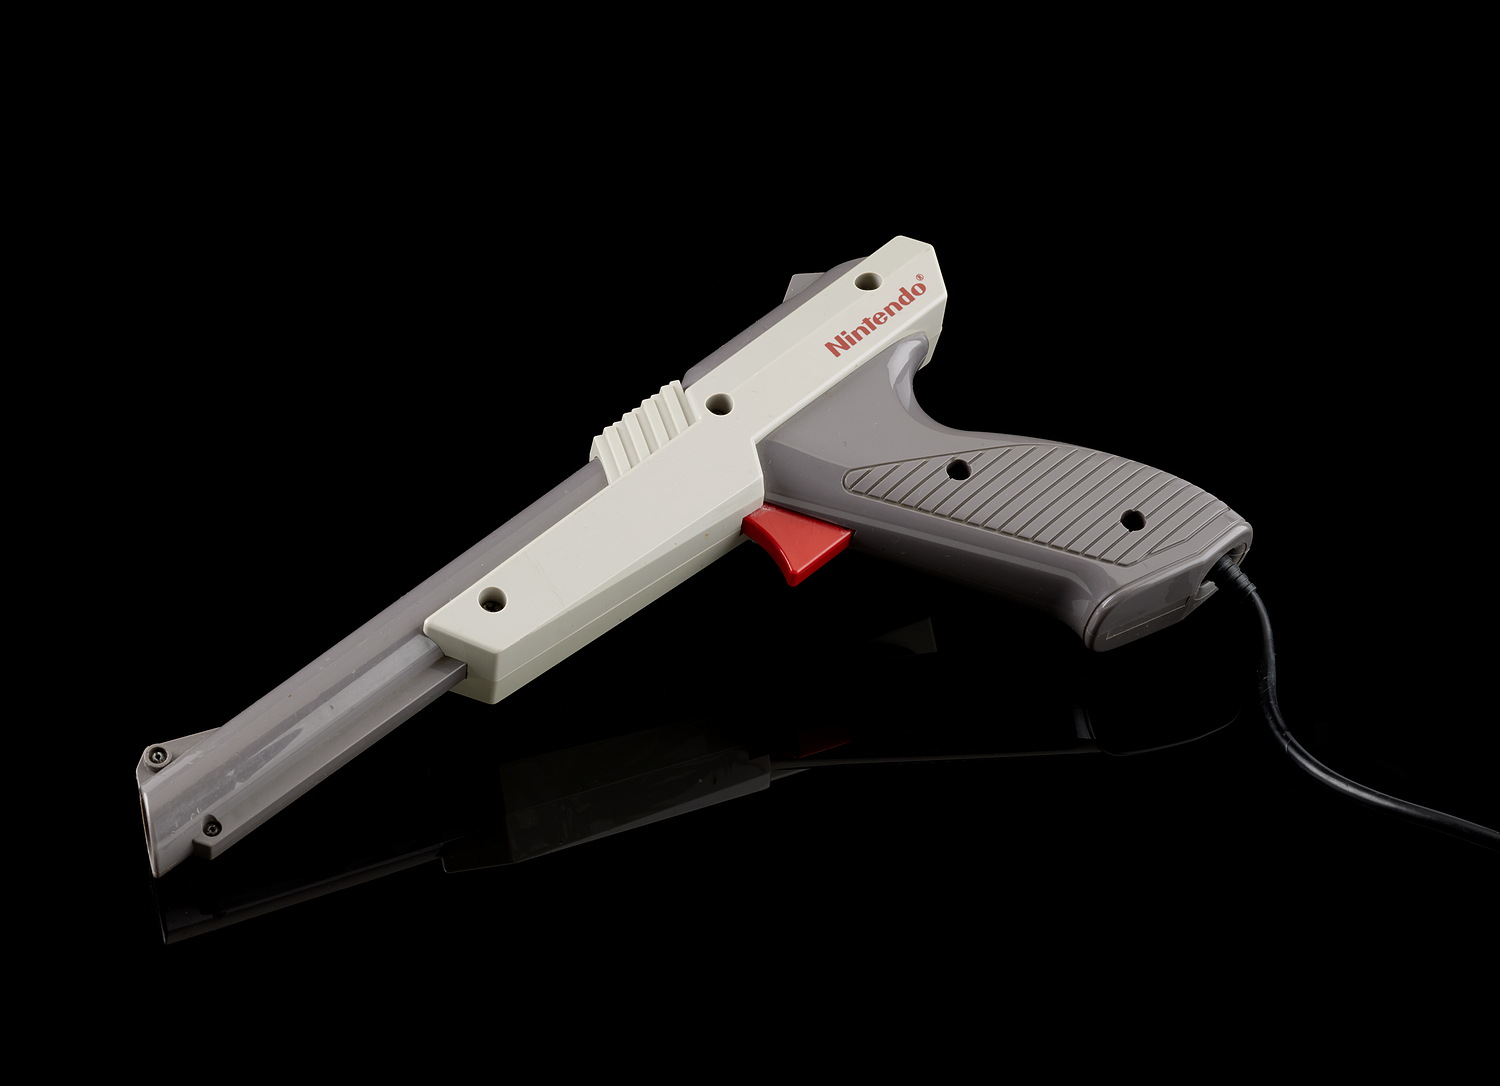 A pistol shaped game controller made of grey plastic